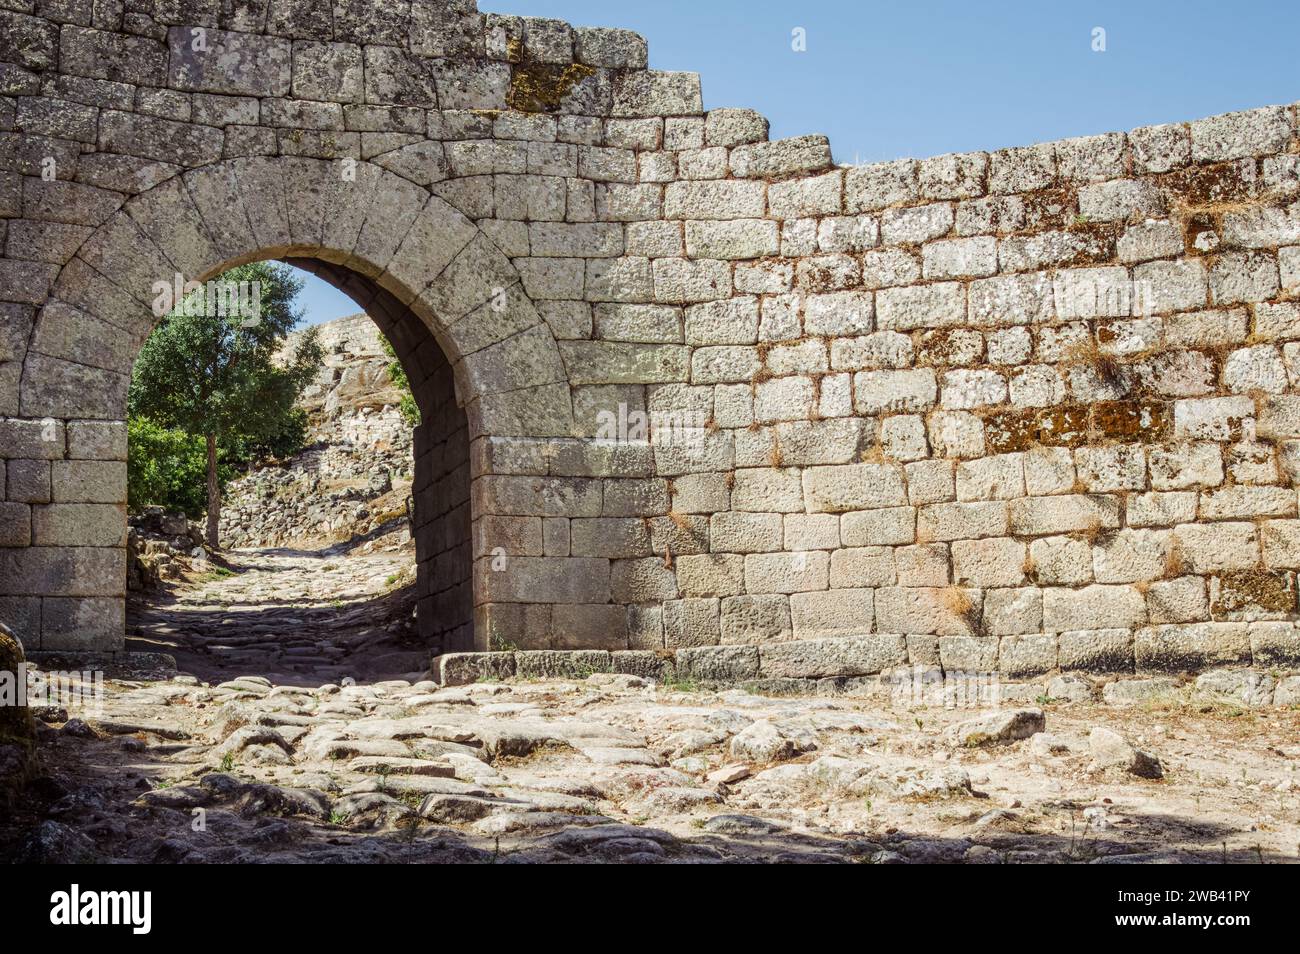 The gate and wall of the old village and castle of Carrazeda de Ansiães (Bragança, Portugal) Stock Photo